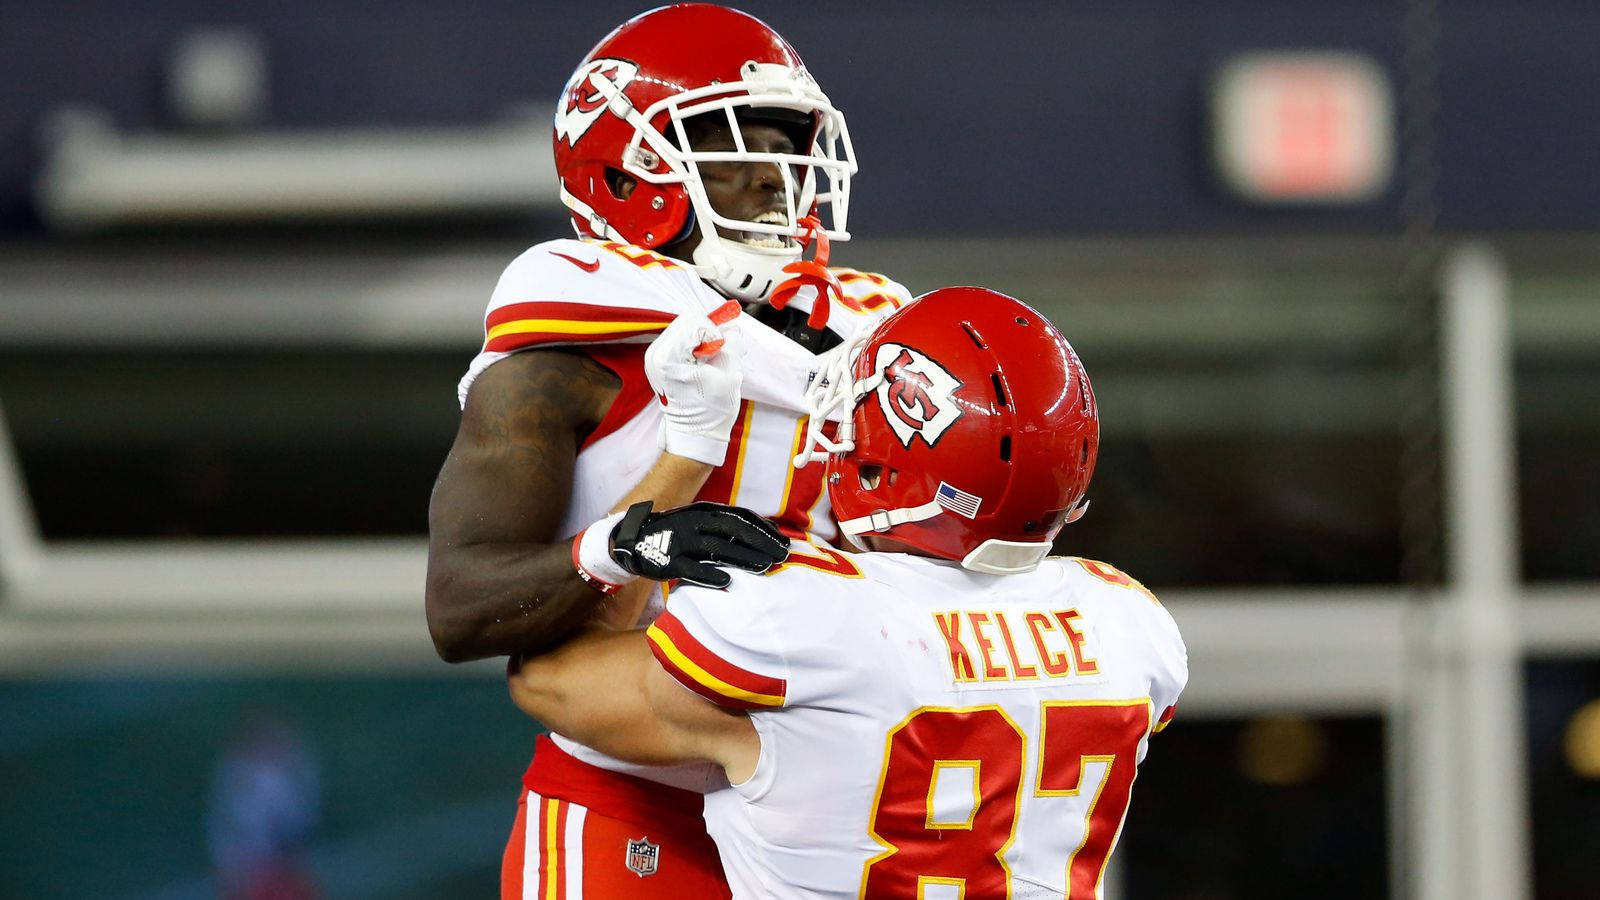 Travis Kelce is hugged by a teammate after catching a touchdown pass. - Travis Kelce